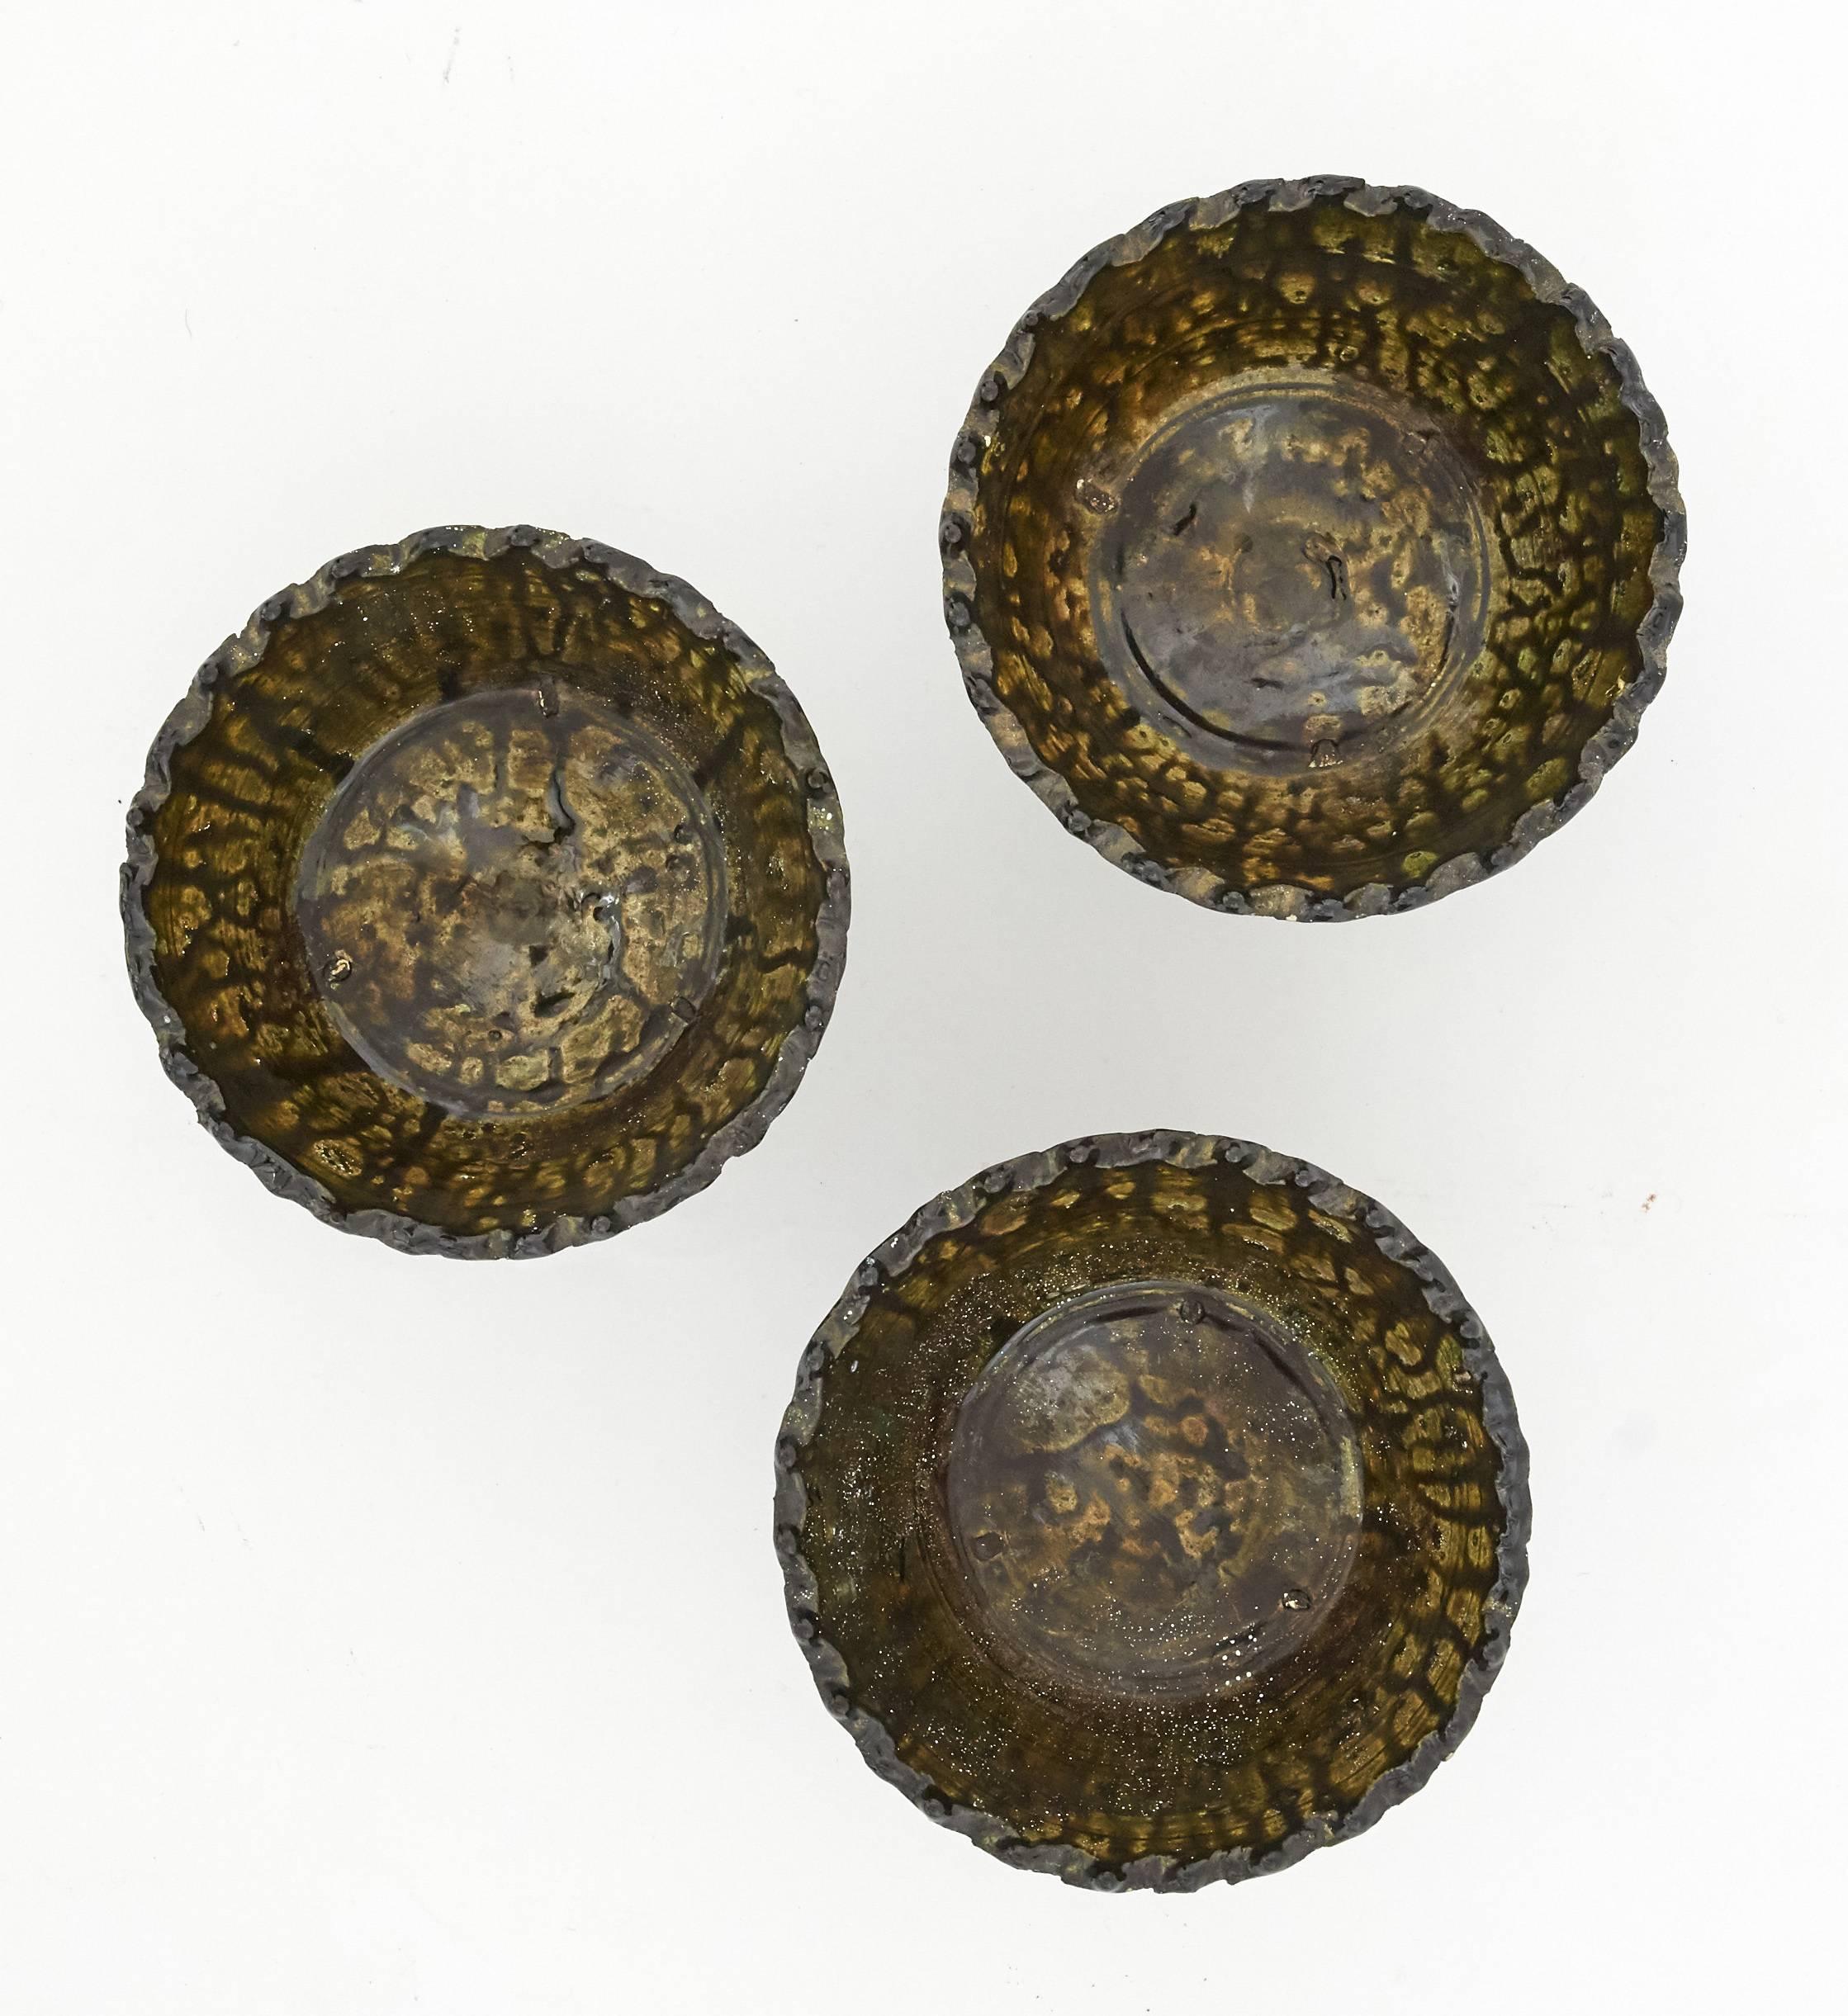 This set of moss green glazed ceramic bowls are handcrafted by a local craftsman in Morocco. They are carved into a beautifully organic structure by hand and glazed in a natural green finish. They are perfect as decorative objects or as serving